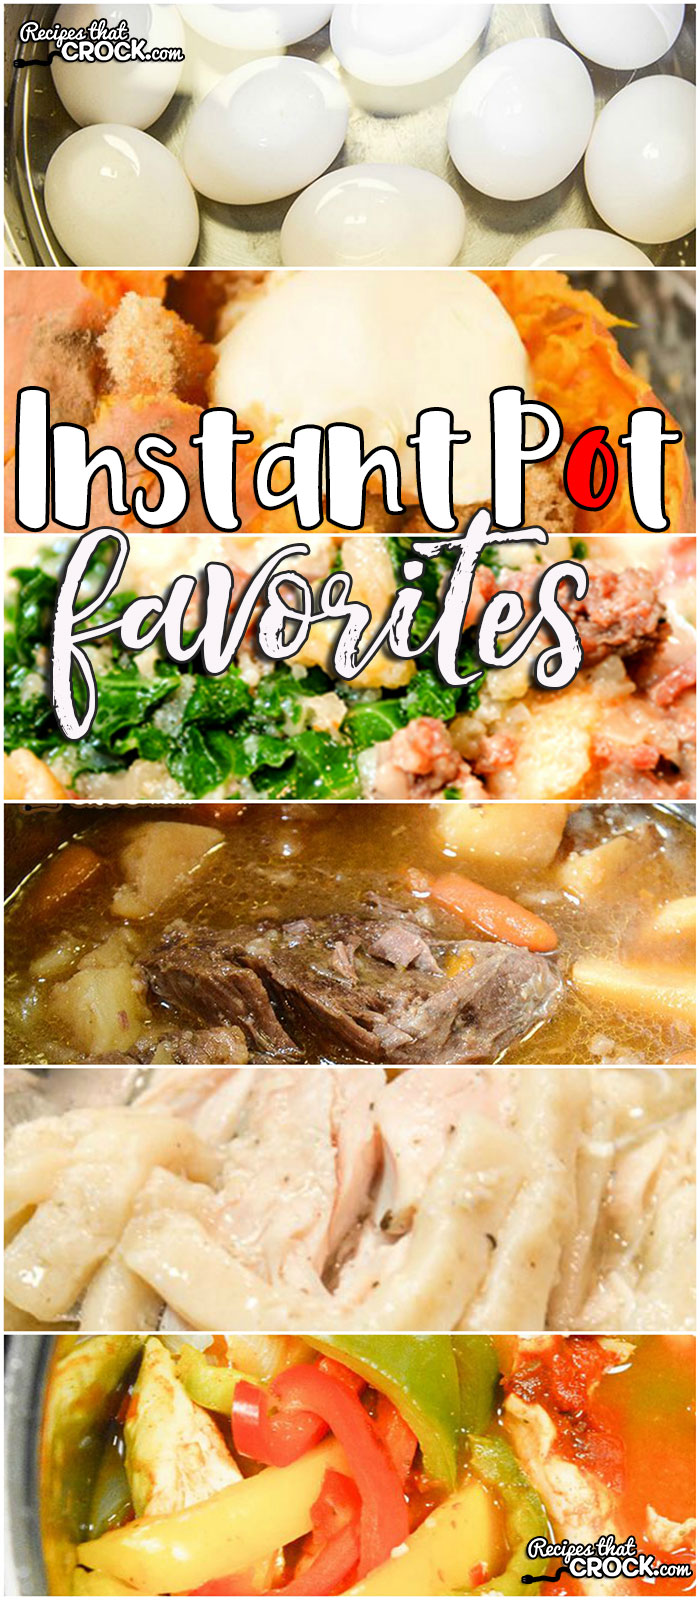 This week for our Friday Favorites we have some awesome Instant Pot Favorites like Mississippi Pot Roast Electric Pressure Cooker Version, Electric Pressure Cooker Chicken Noodles, Perfect Instant Pot Roast, Instant Pot Hard Boiled Eggs, Electric Pressure Cooker Sweet Potatoes, Unstuffed Cabbage Soup Electric Pressure Cooker Recipe, Instant Pot Chicken Fajitas and Instant Pot Zuppa Toscana Soup. via @recipescrock